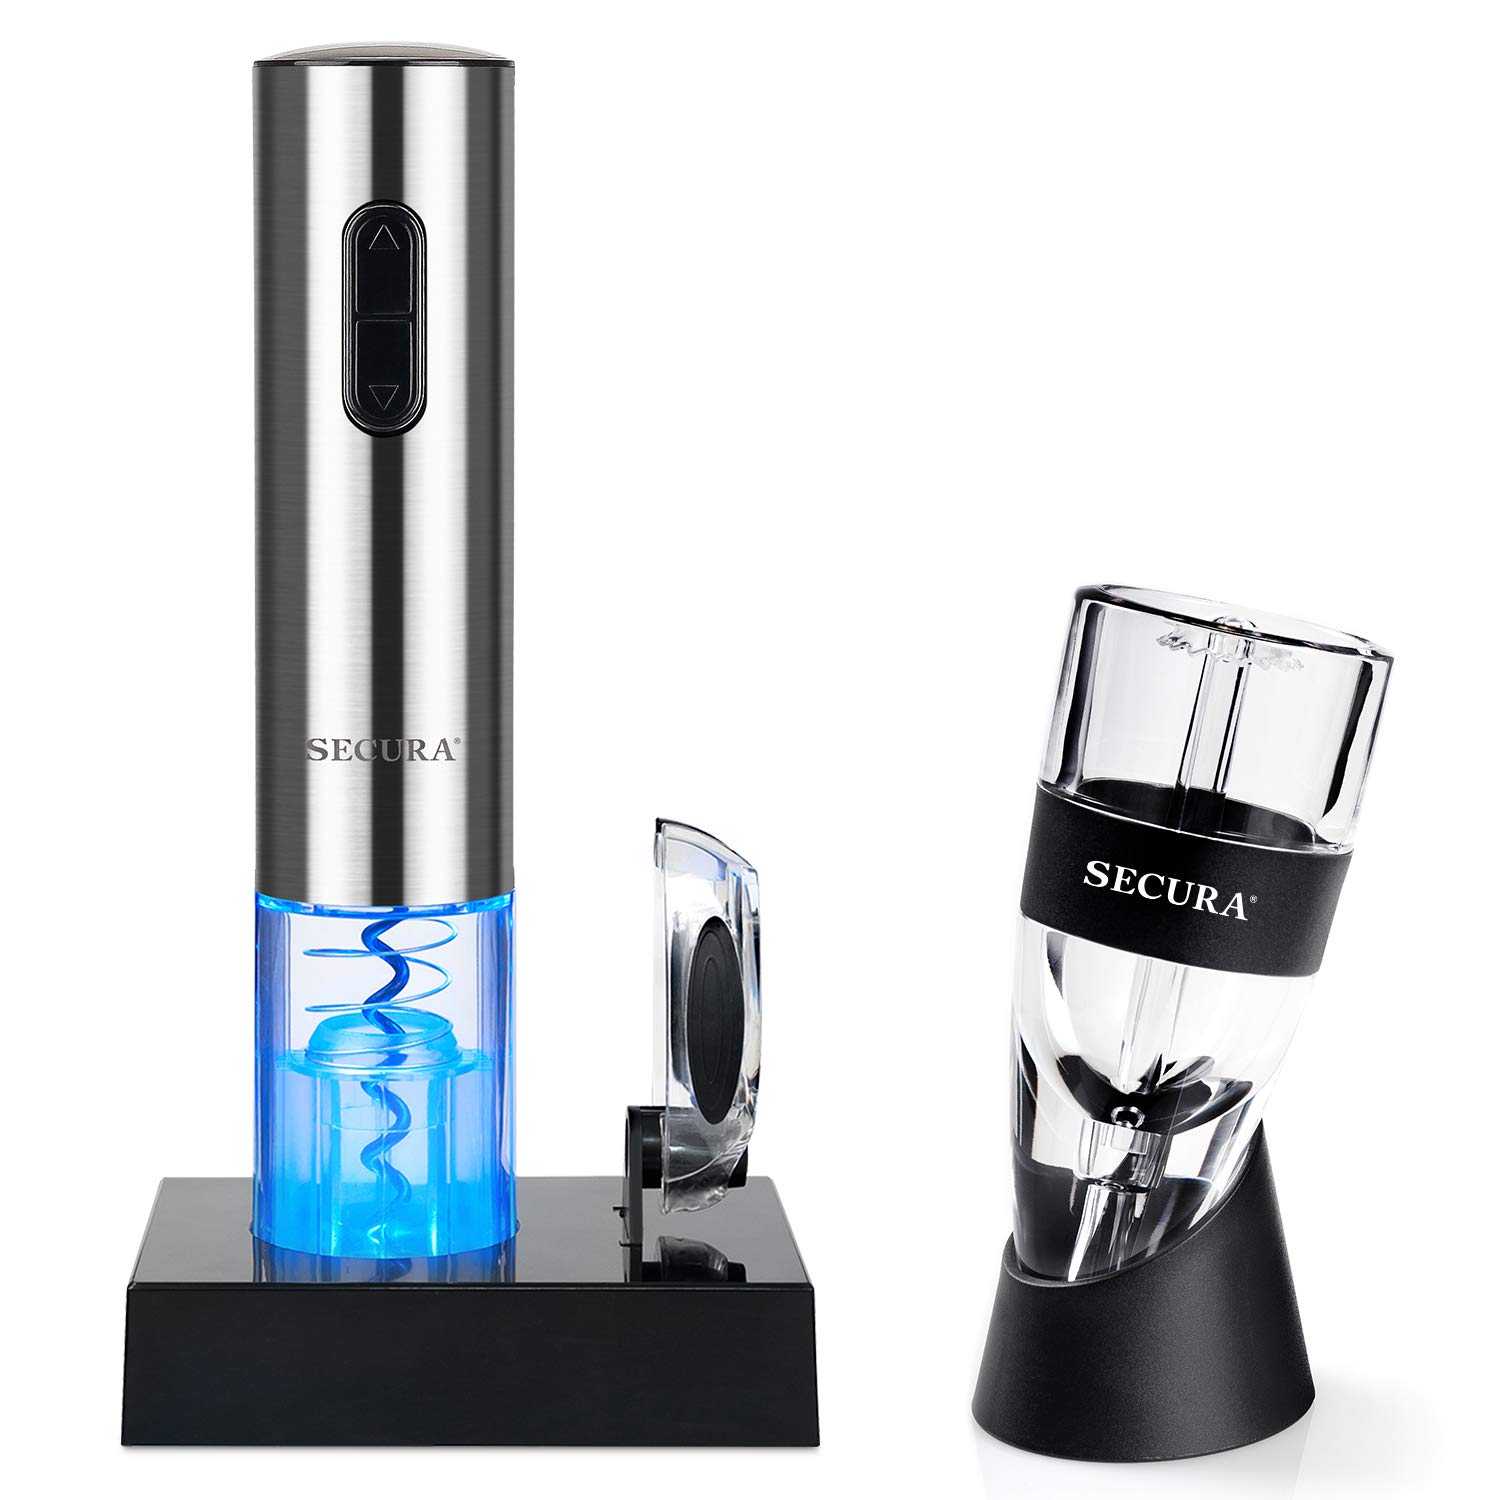 Secura Electric Opener, Foil Cutter, Wine Aerator, Automatic Electric Wine Bottle Corkscrew Opener Set, List Price is $59.99, Now Only $25.03